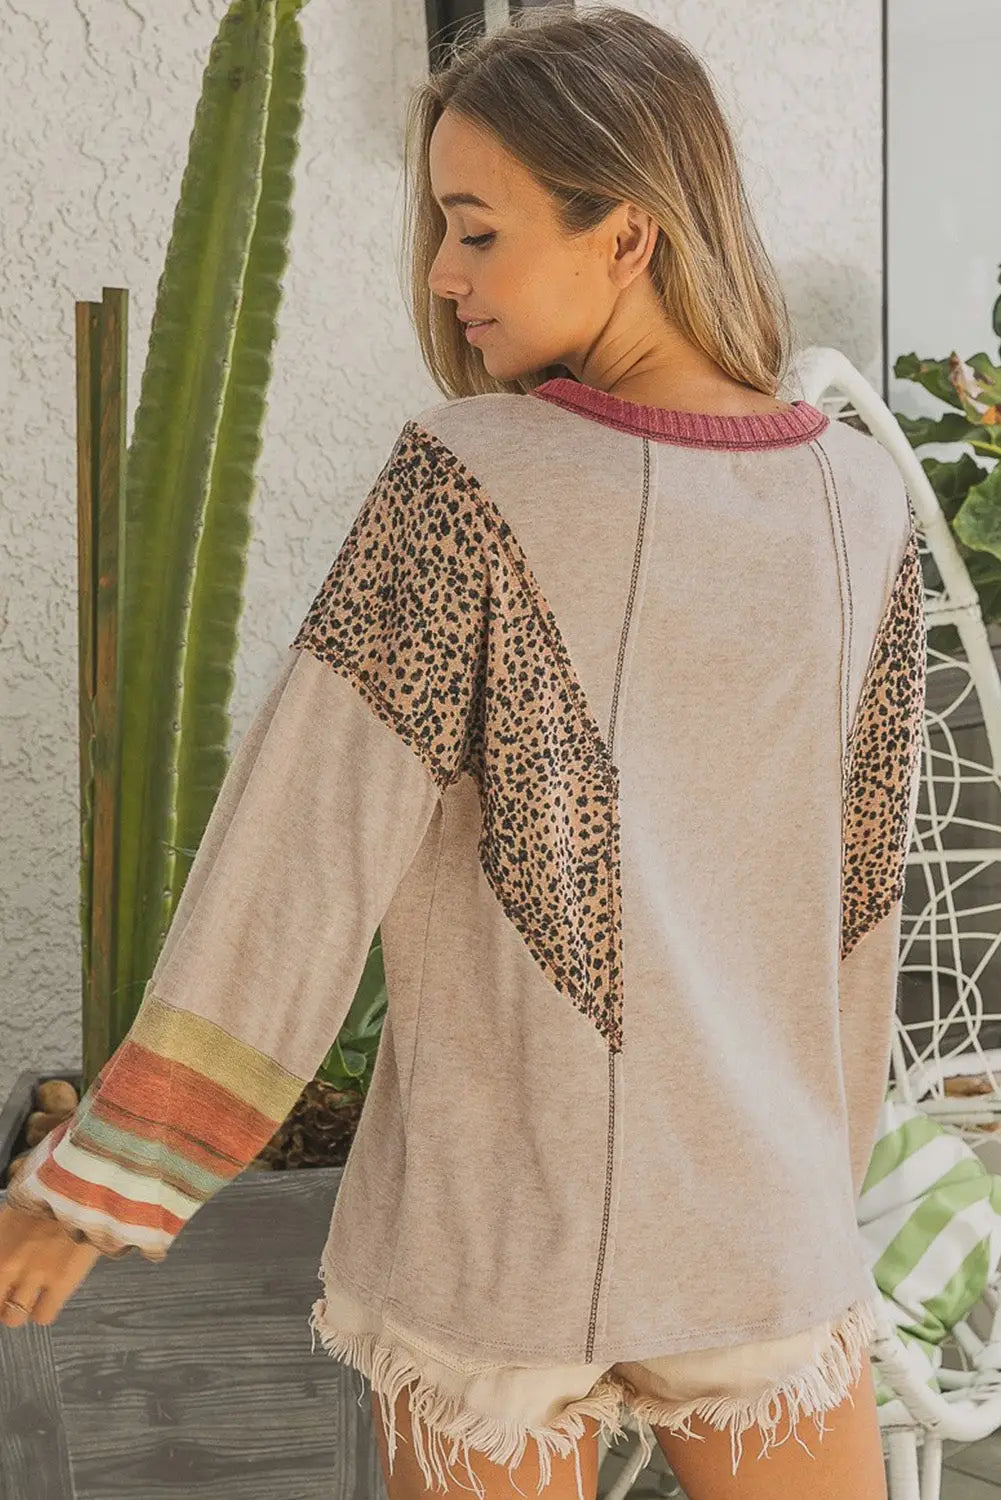 Khaki leopard serape patchwork exposed stitching pullover top - tops